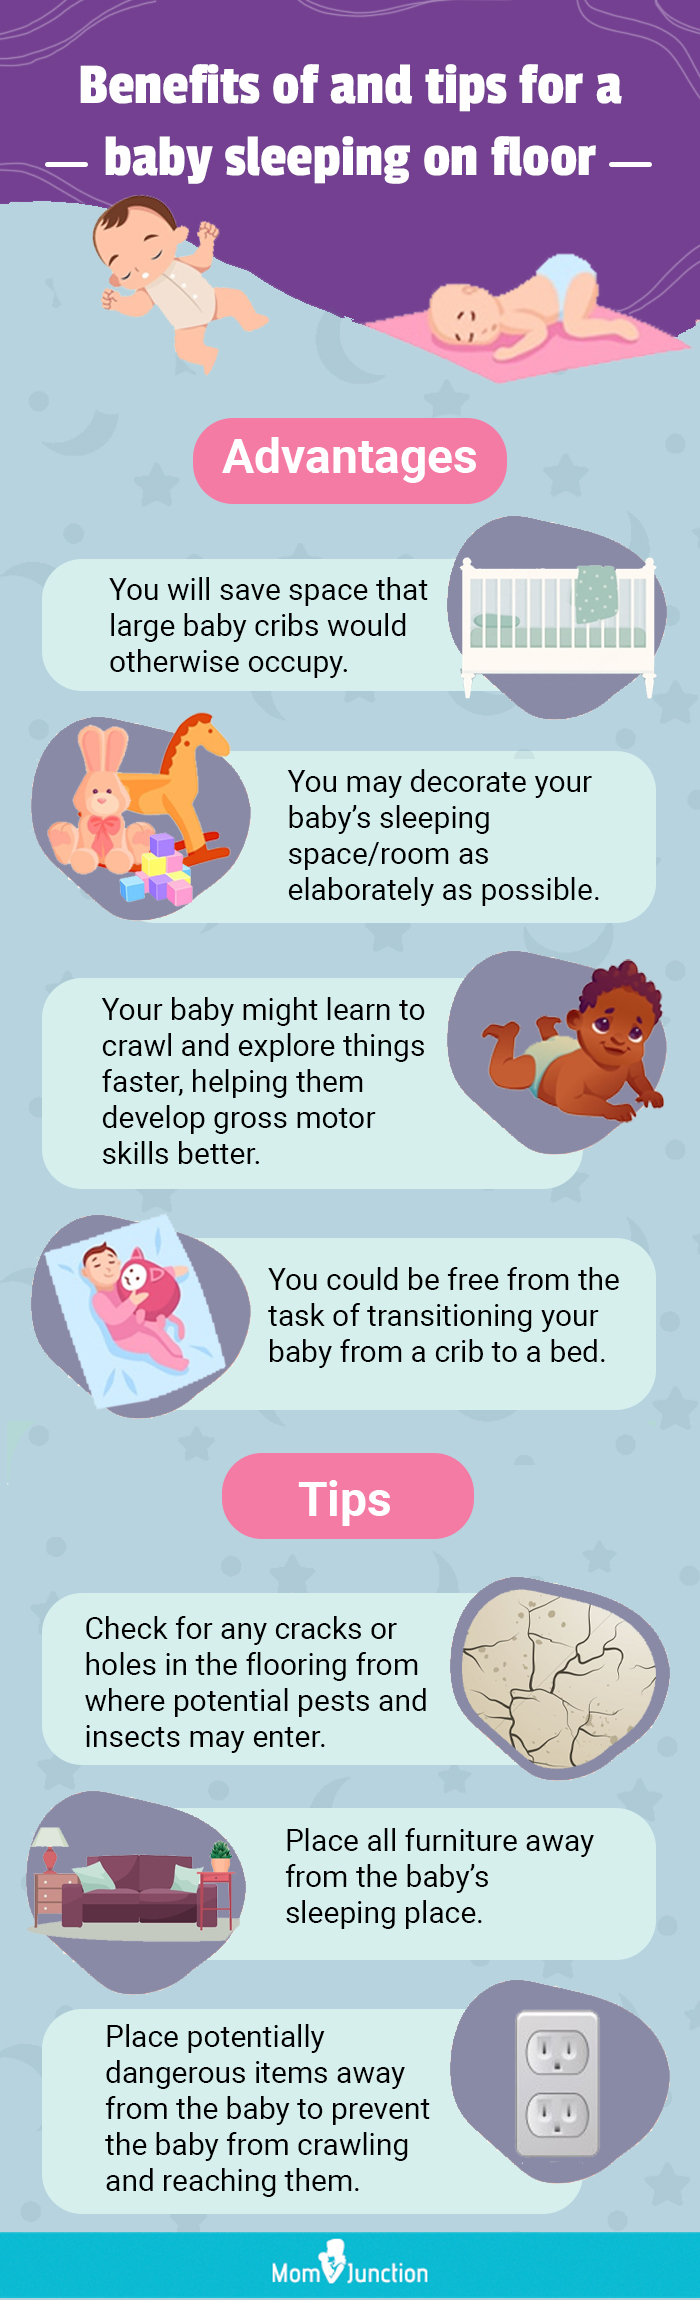 benefits and tips for baby sleeping on the floor (infographic)